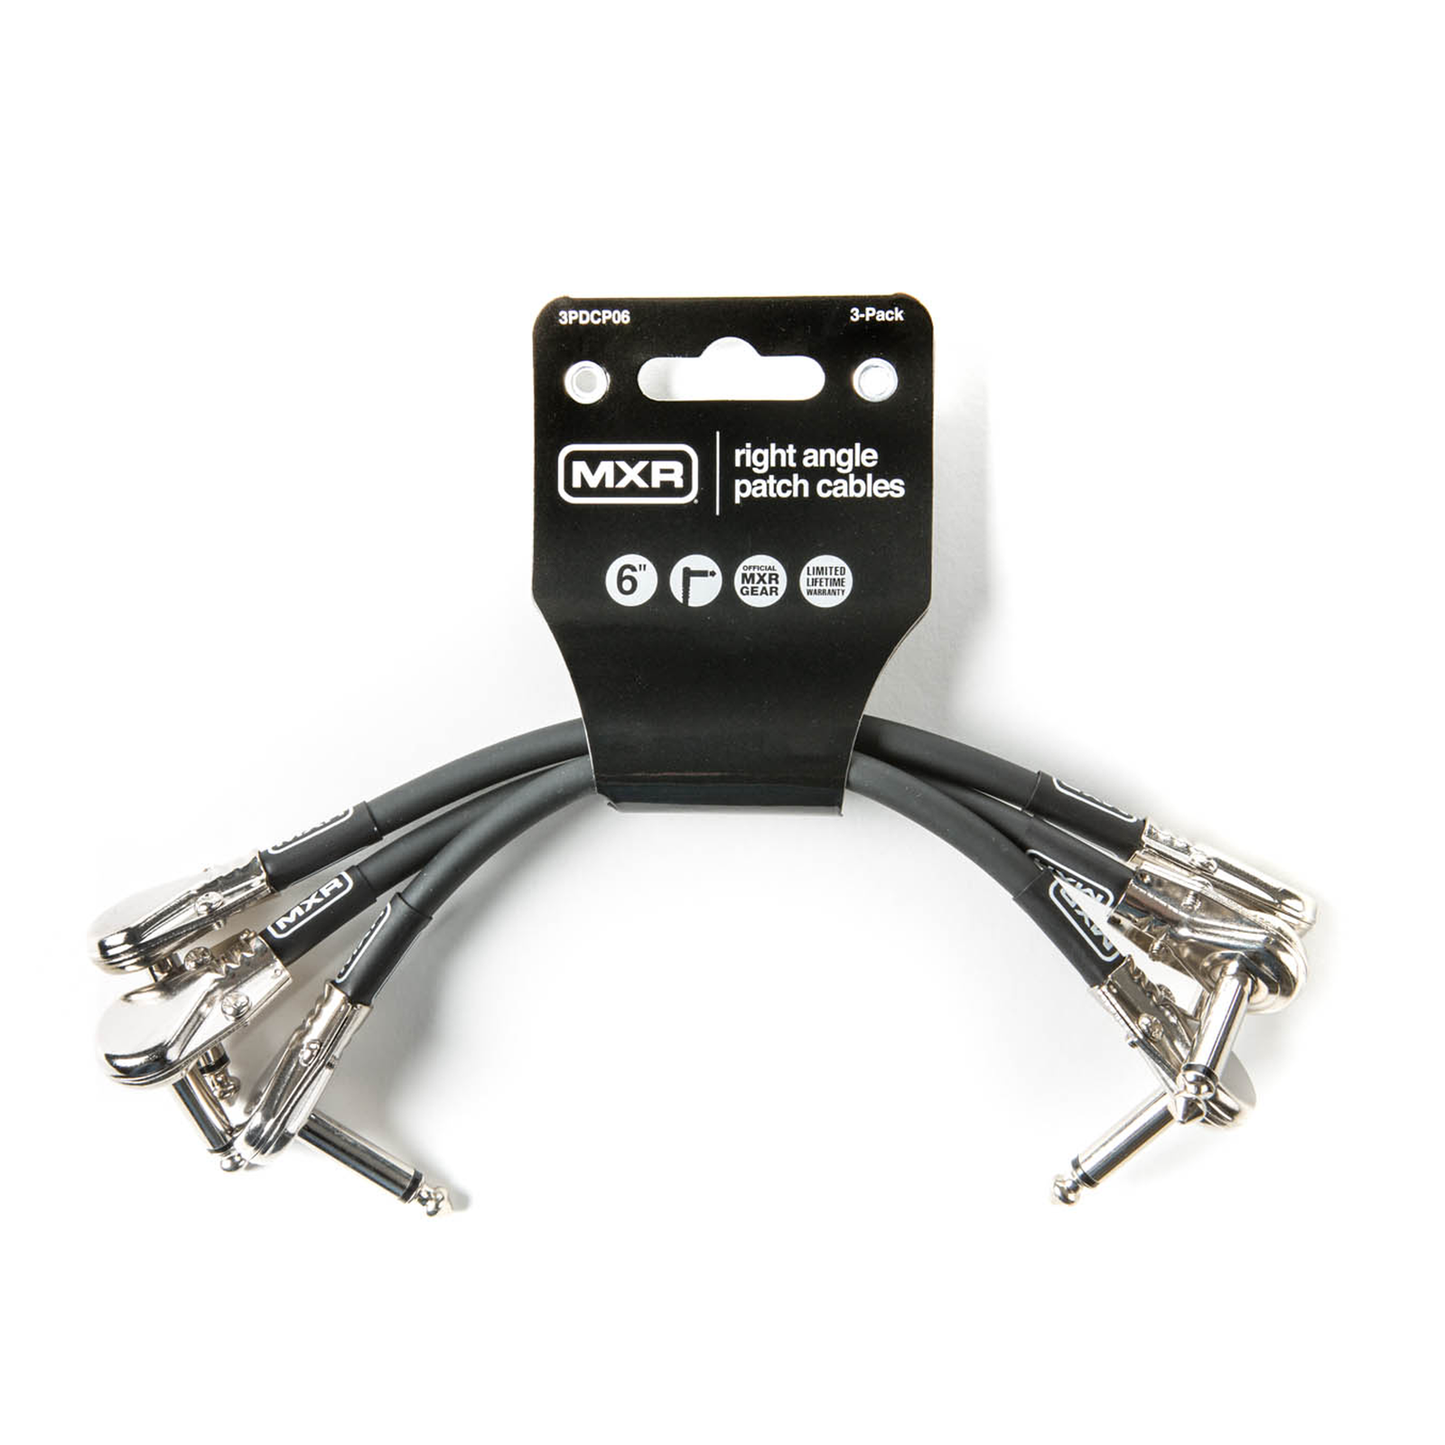 MXR Right Angle Patch Cable - 3 Pack